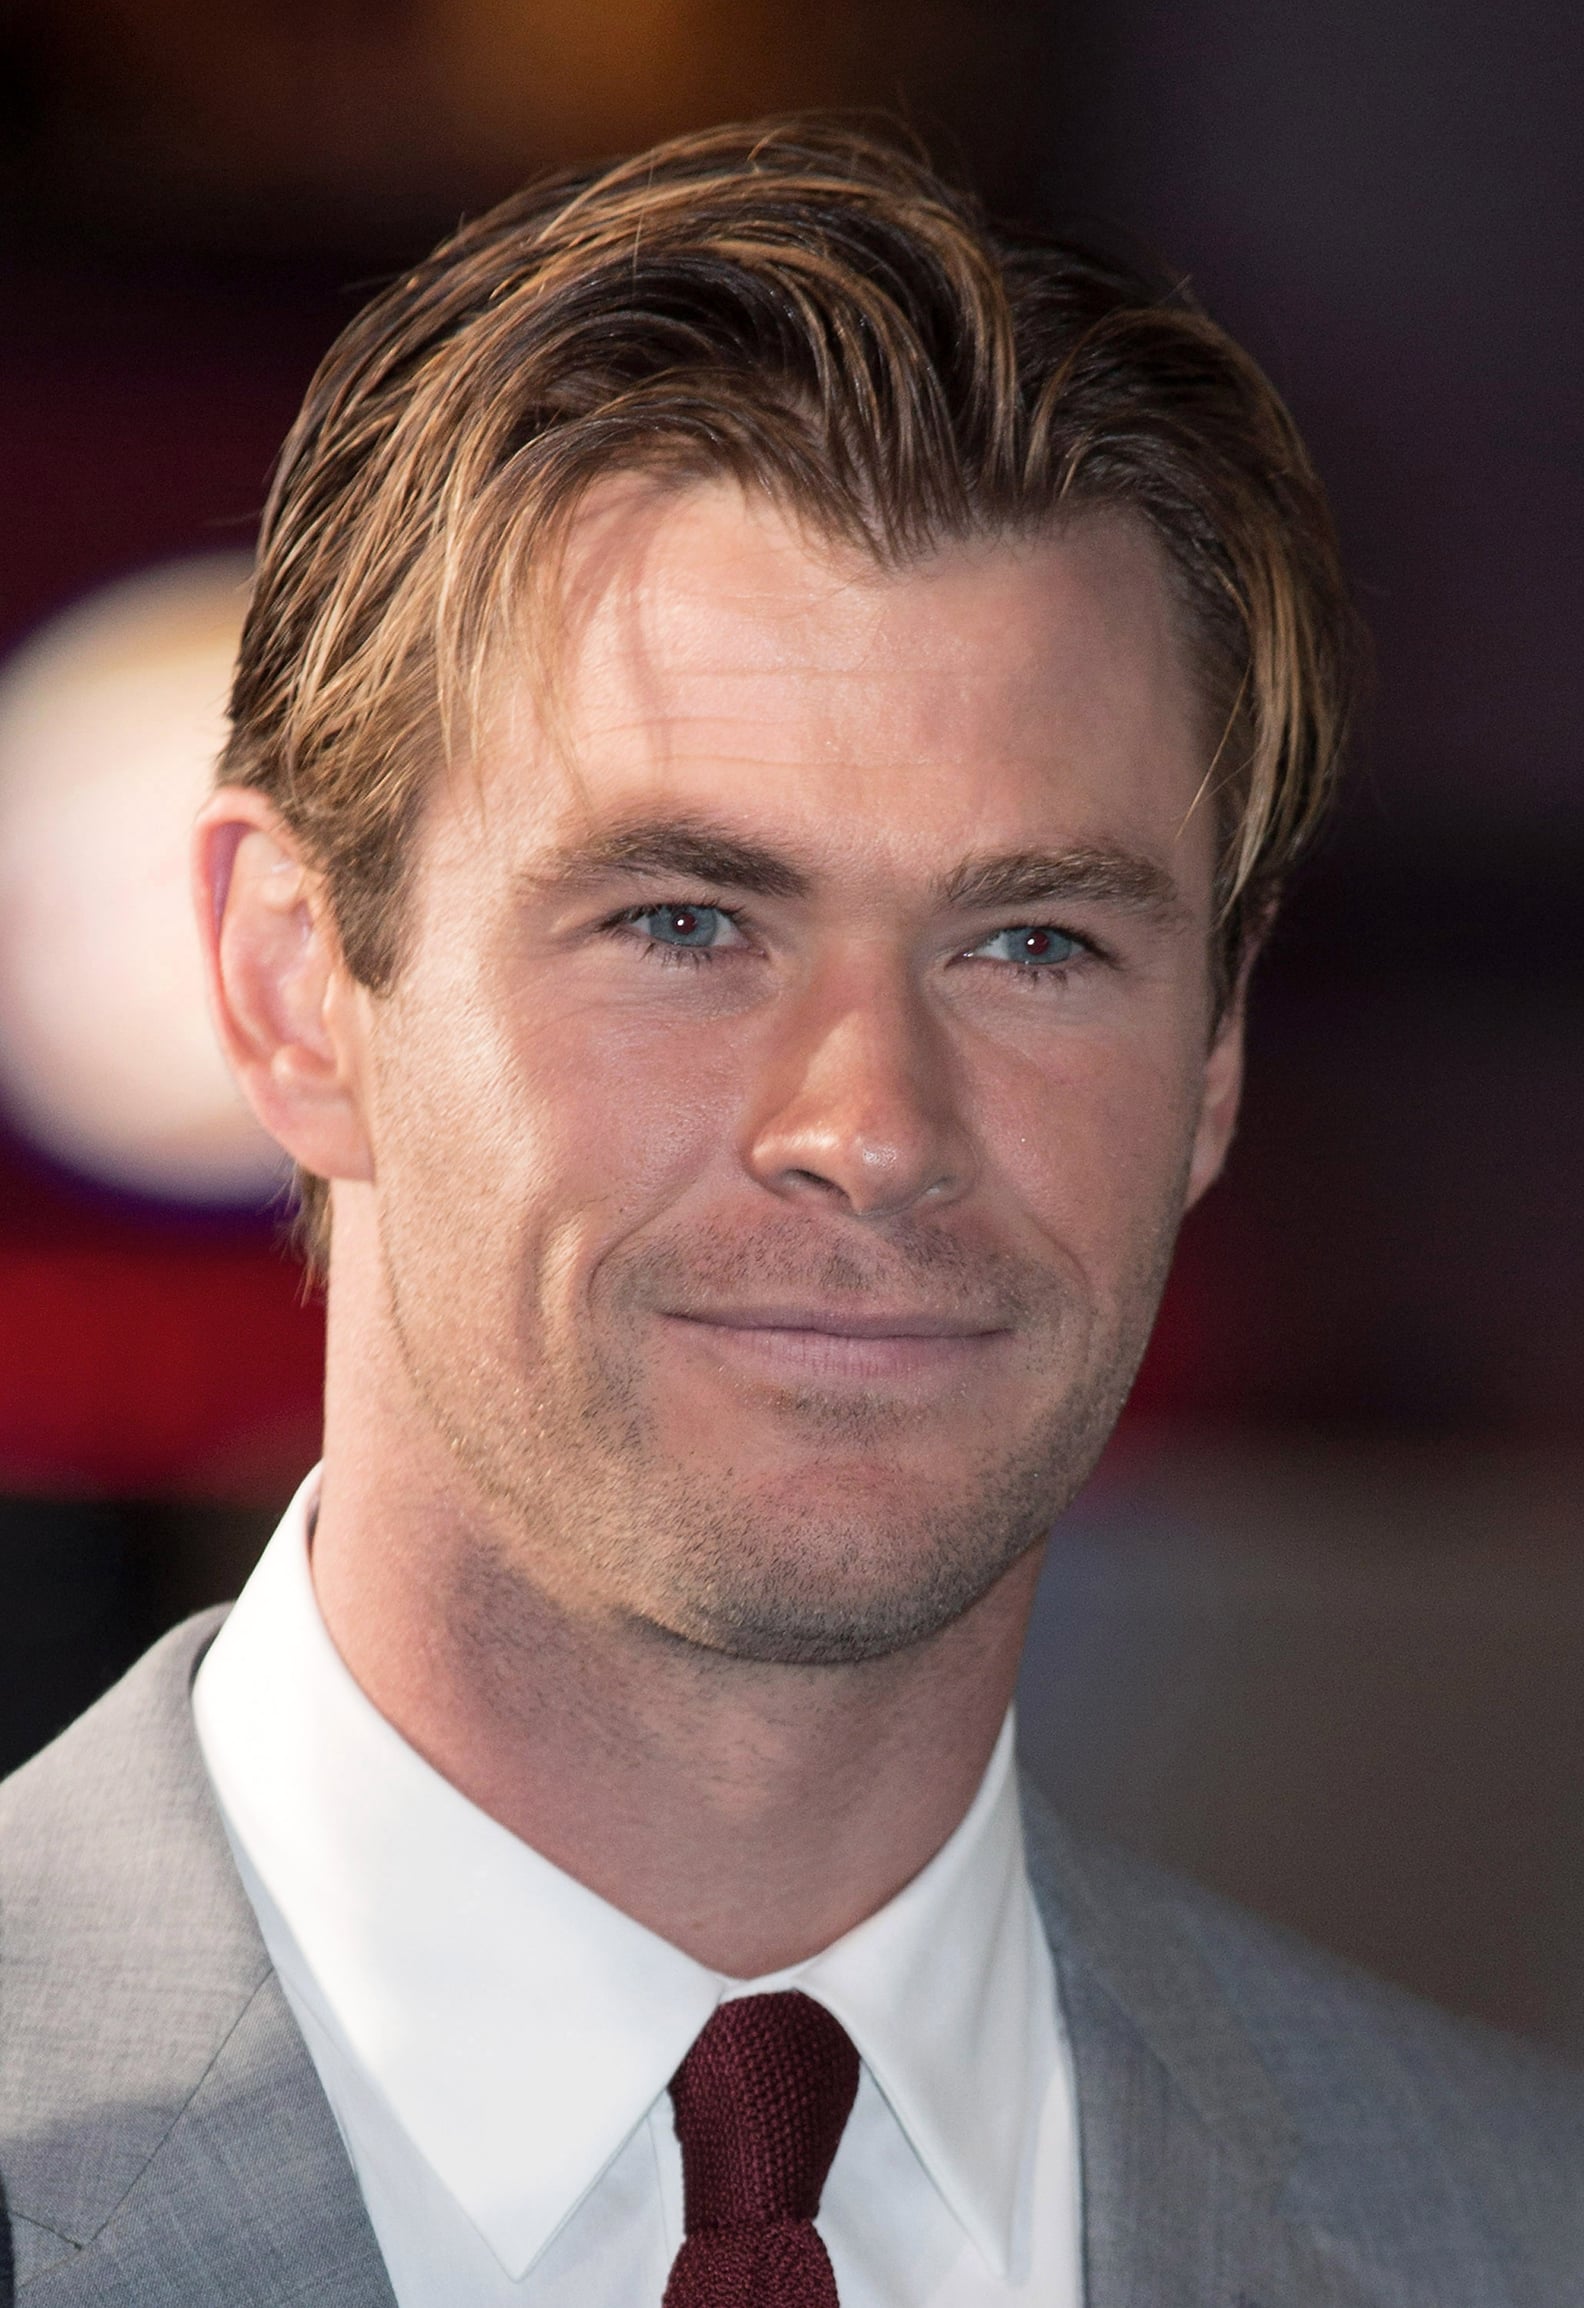 Chris Hemsworth at the Heart of the Sea UK Premiere Pictures | POPSUGAR ...